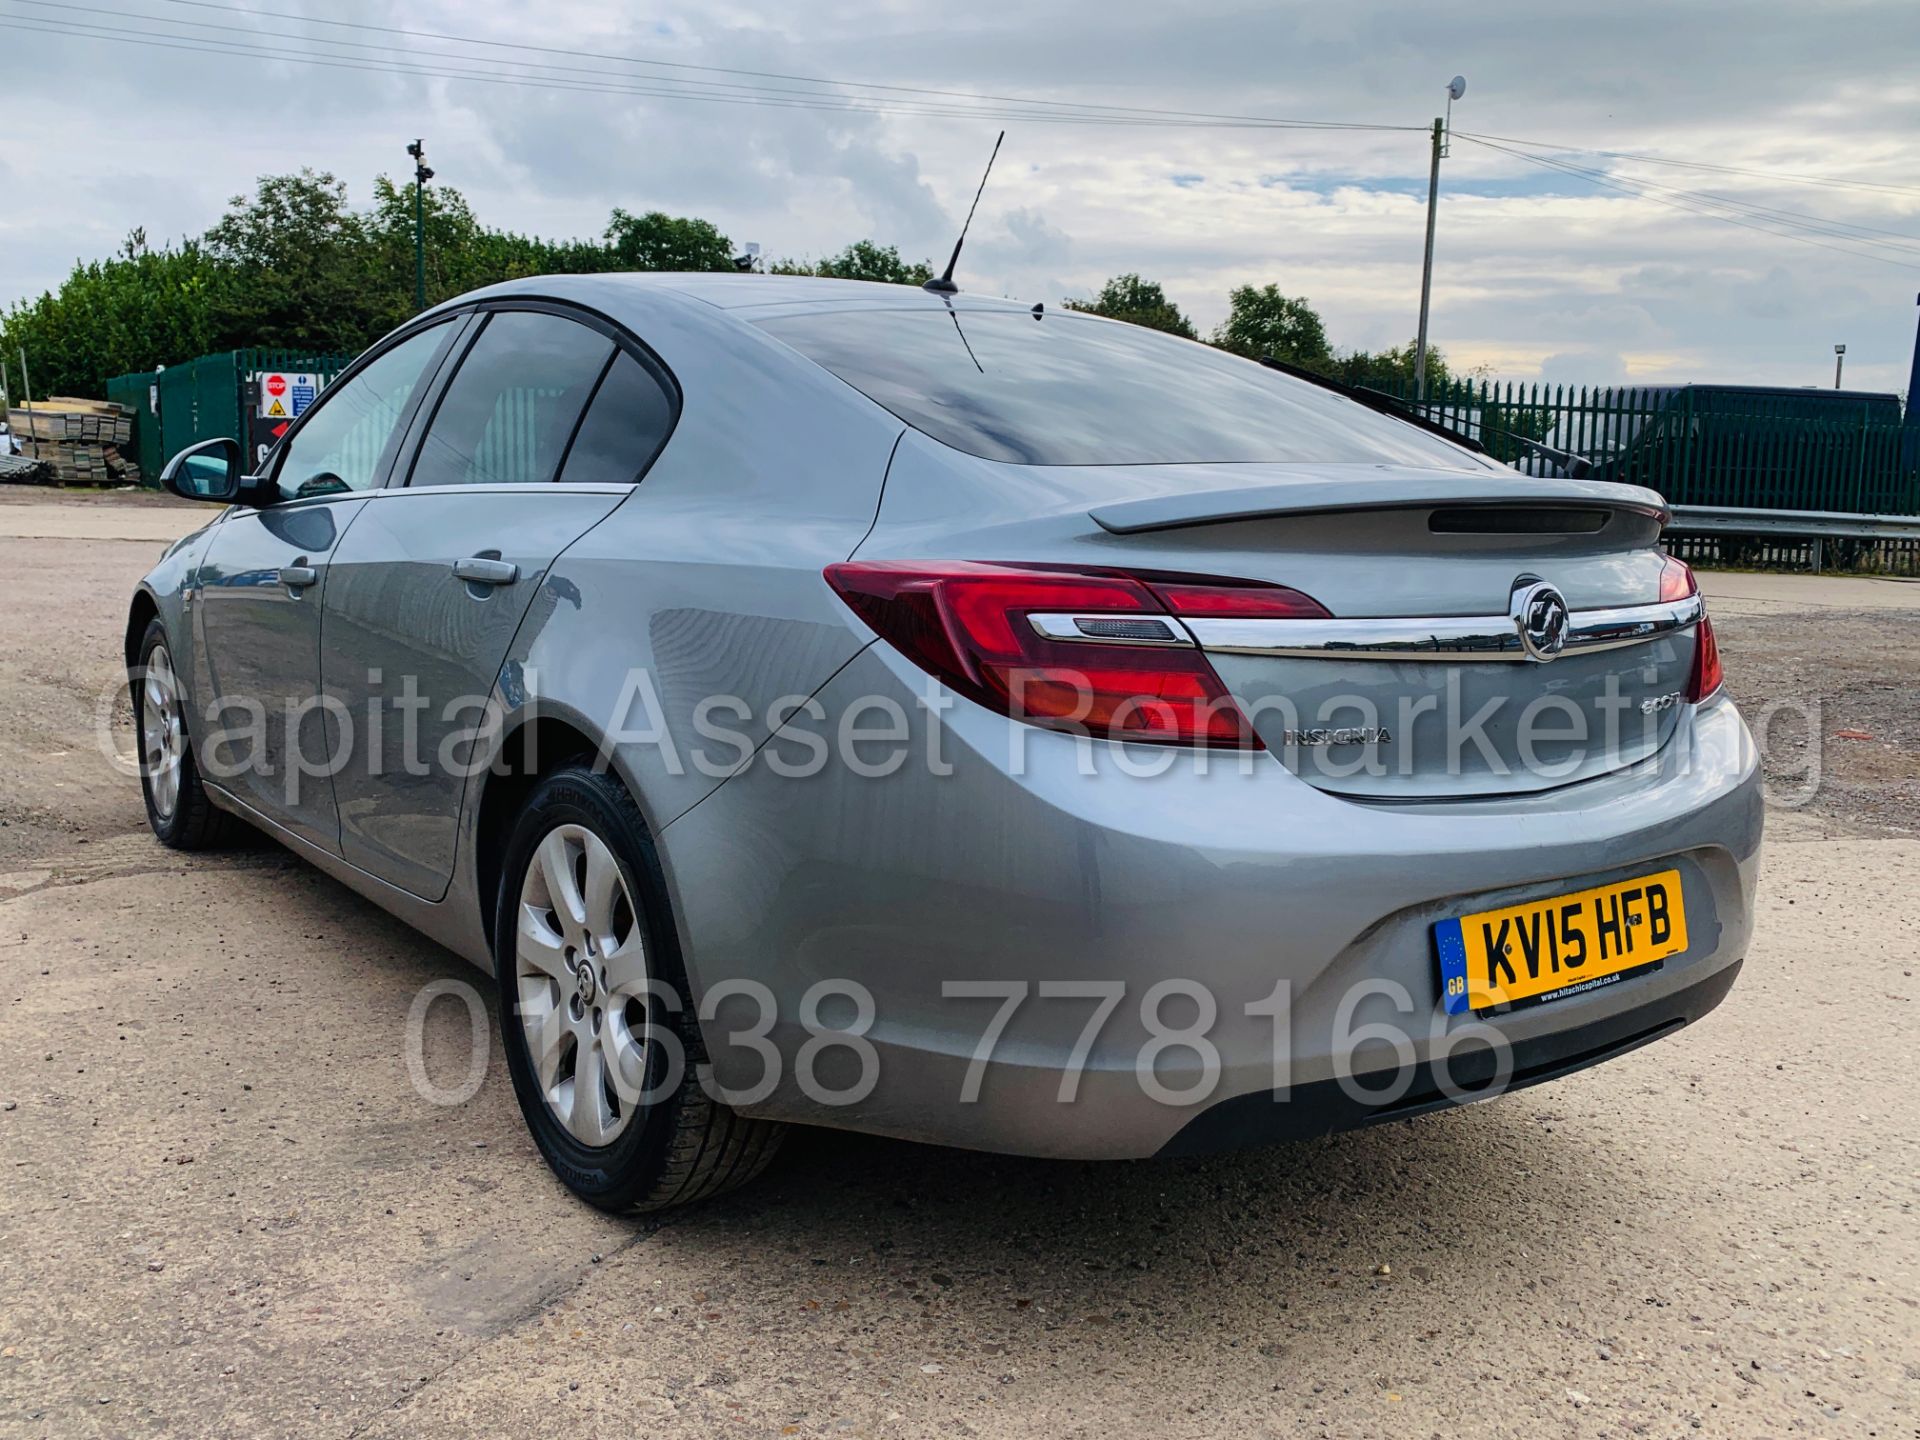 VAUXHALL INSIGNIA *SRI EDITION* (2015 - NEW MODEL) '2.0 CDTI - STOP/START - 6 SPEED' (1 OWNER) - Image 9 of 40